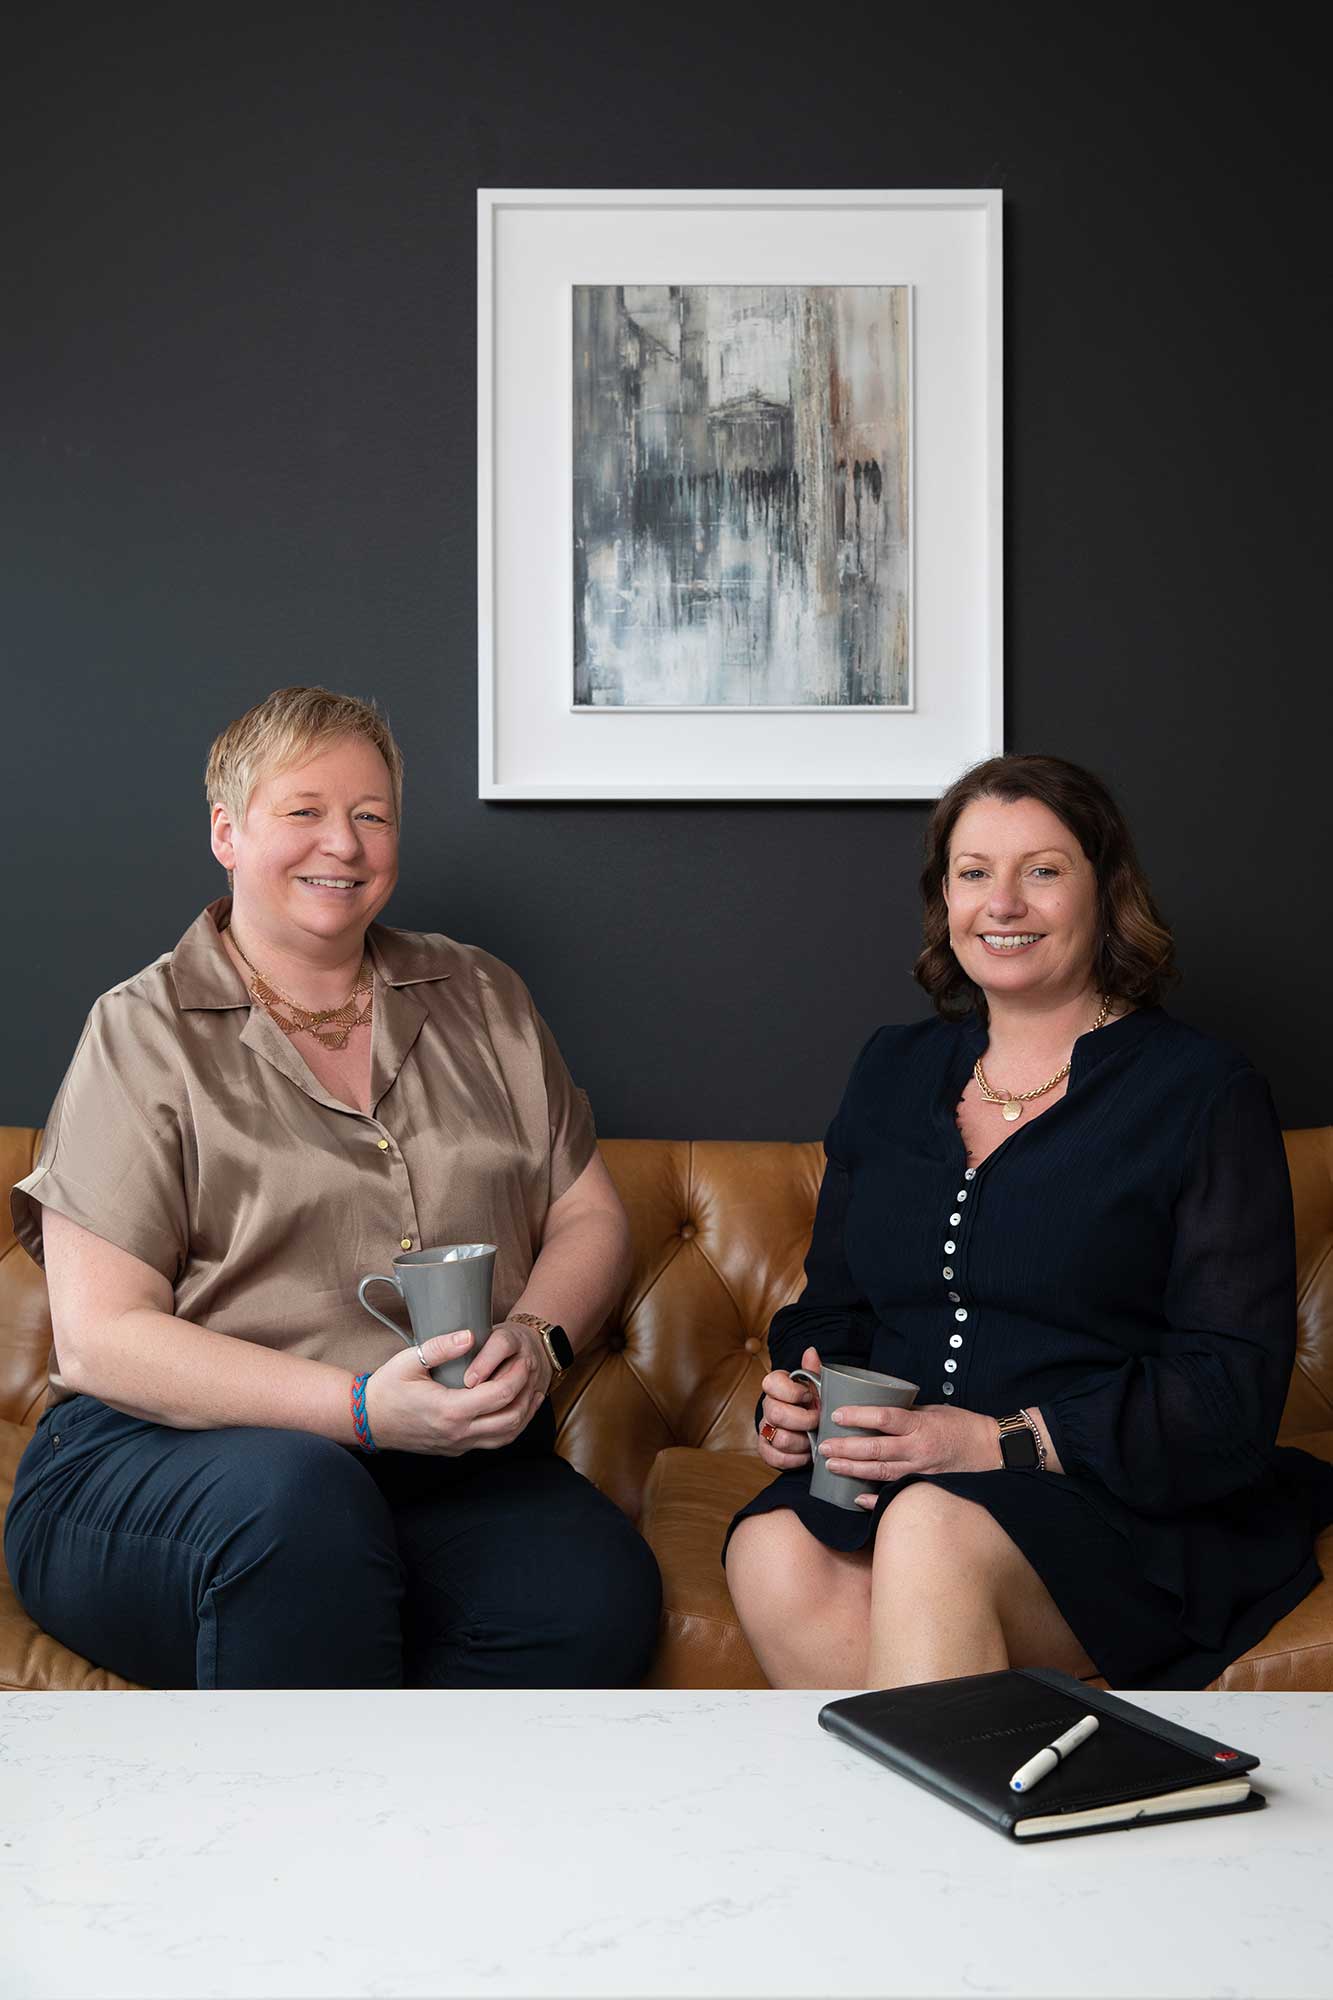 Raymond James Hitchin Faye Silver and Susie Bewell photographed by Hertfordshire Personal Branding Photographer © Tigz Rice Ltd 2023. http://www.tigzrice.com